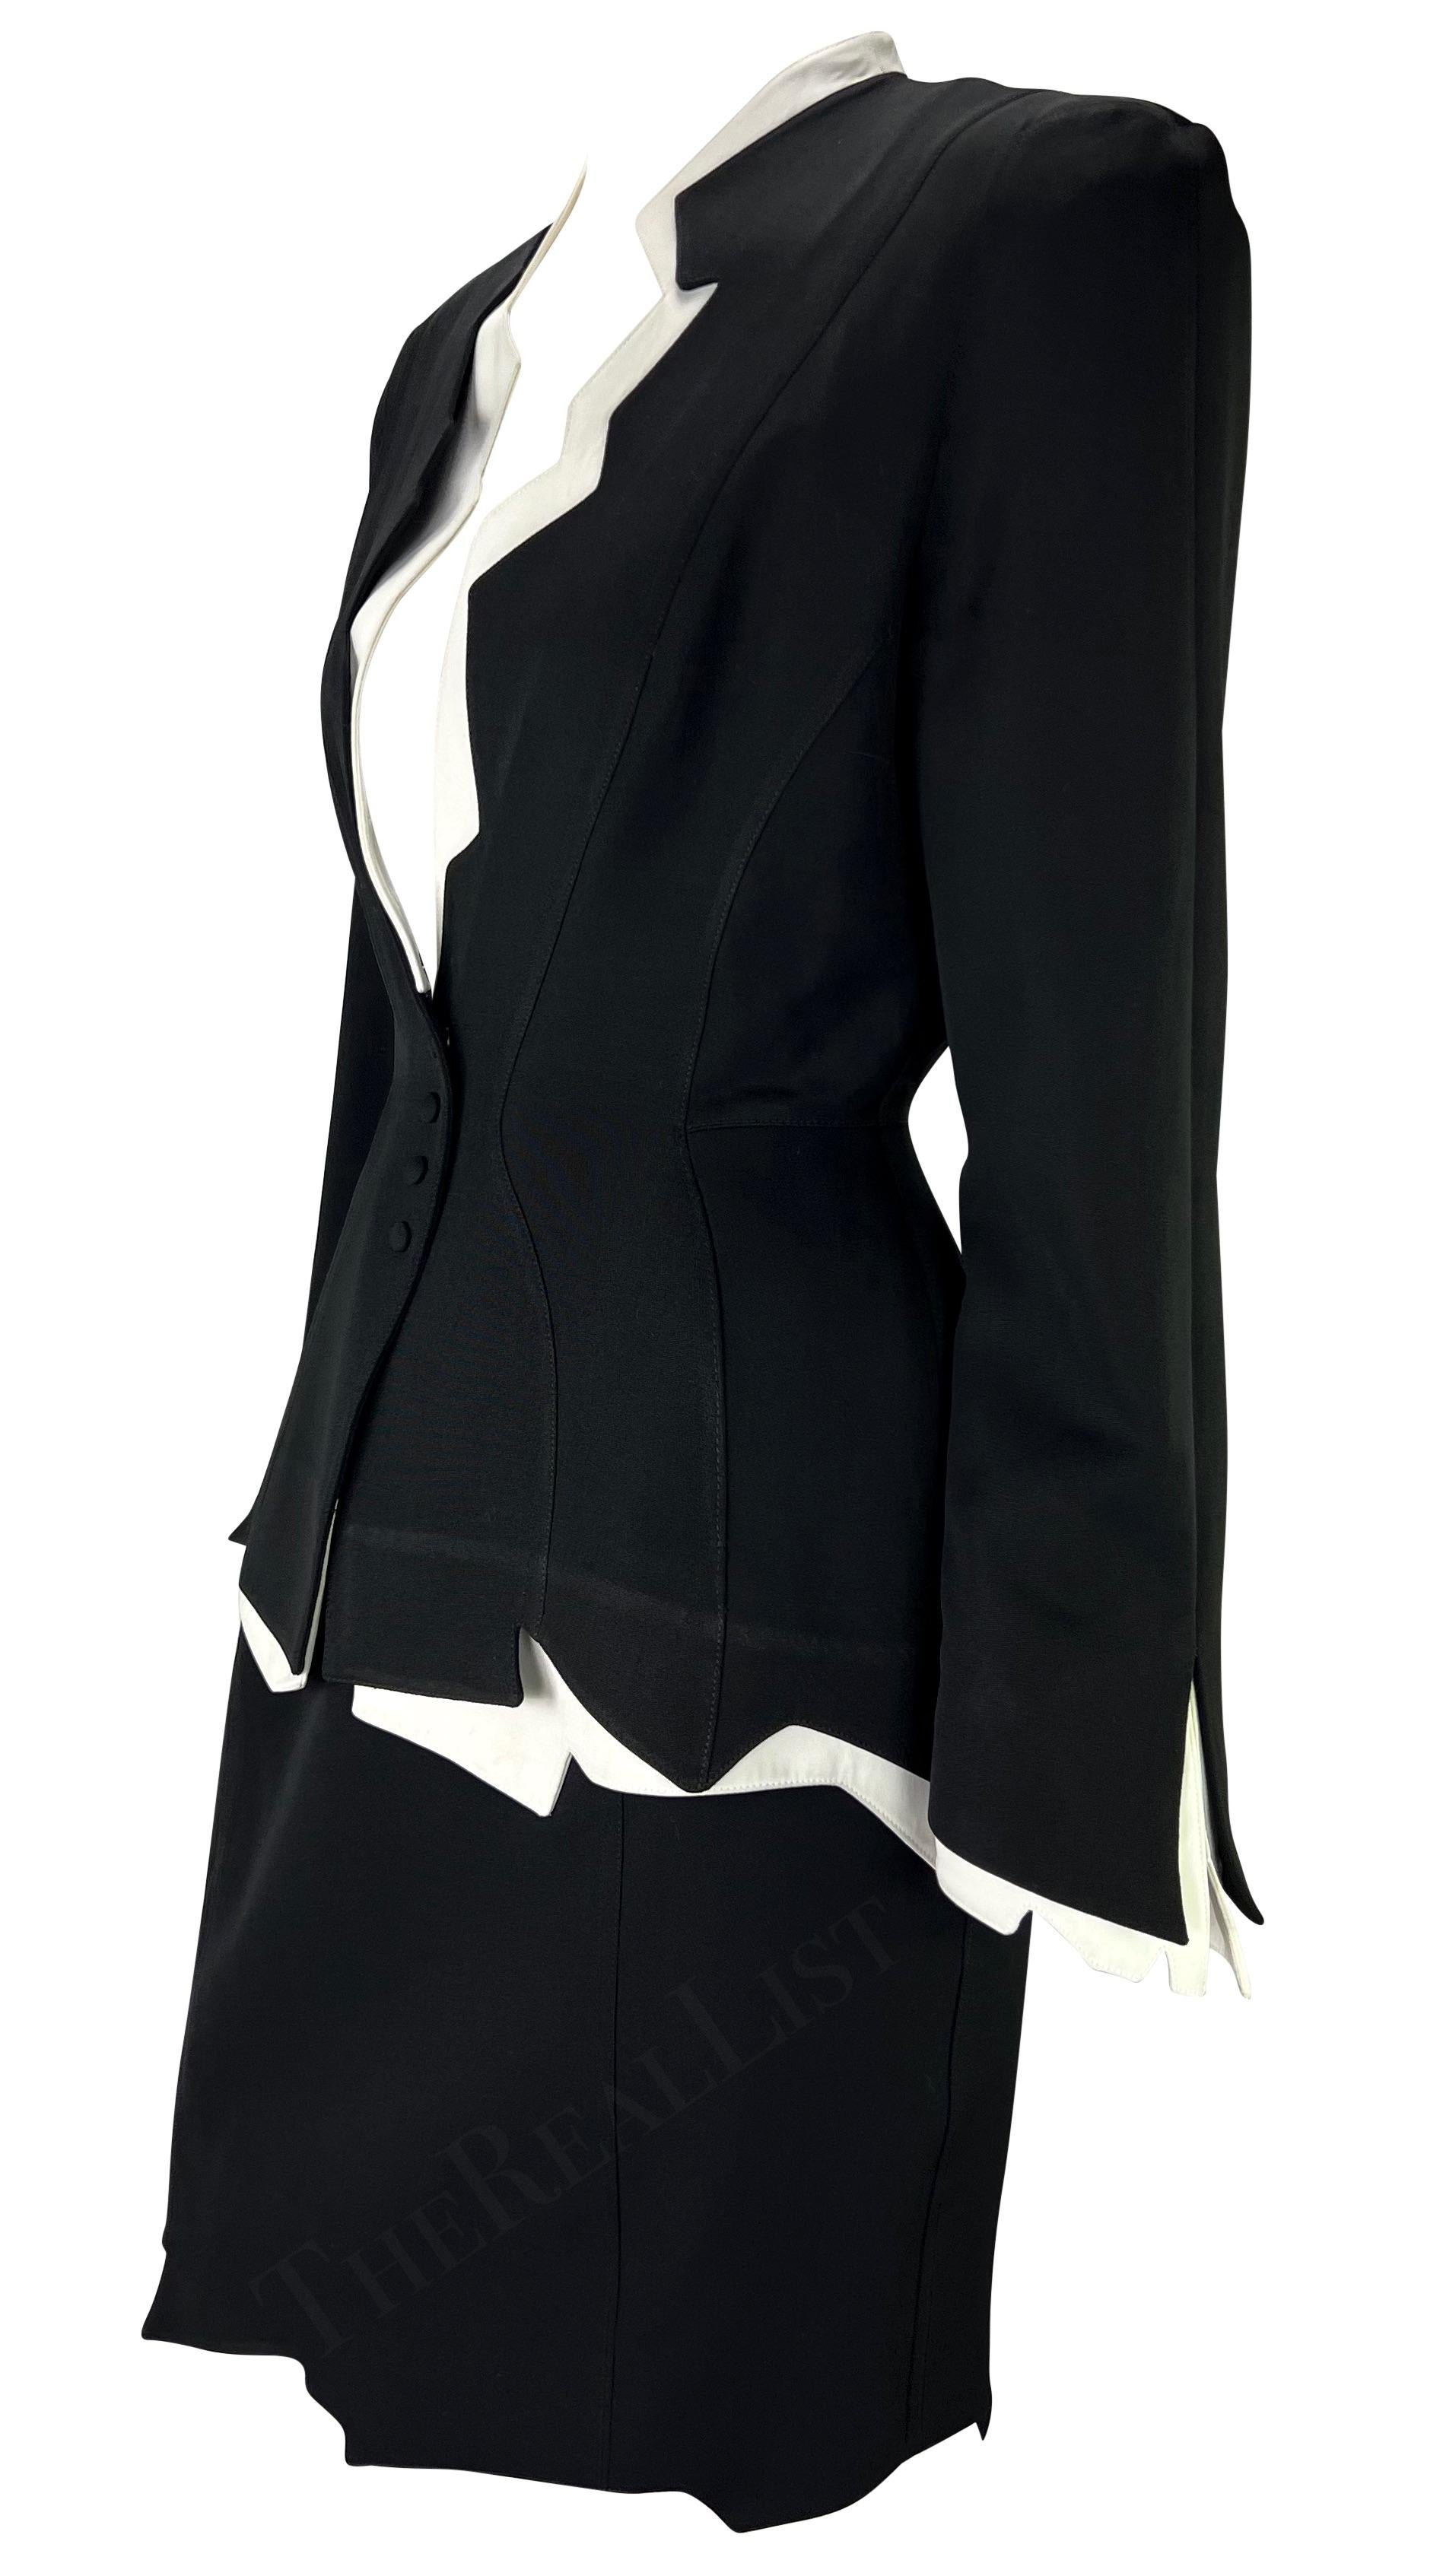 S/S 1994 Thierry Mugler Black White Sculptural Skirt Suit In Good Condition In West Hollywood, CA